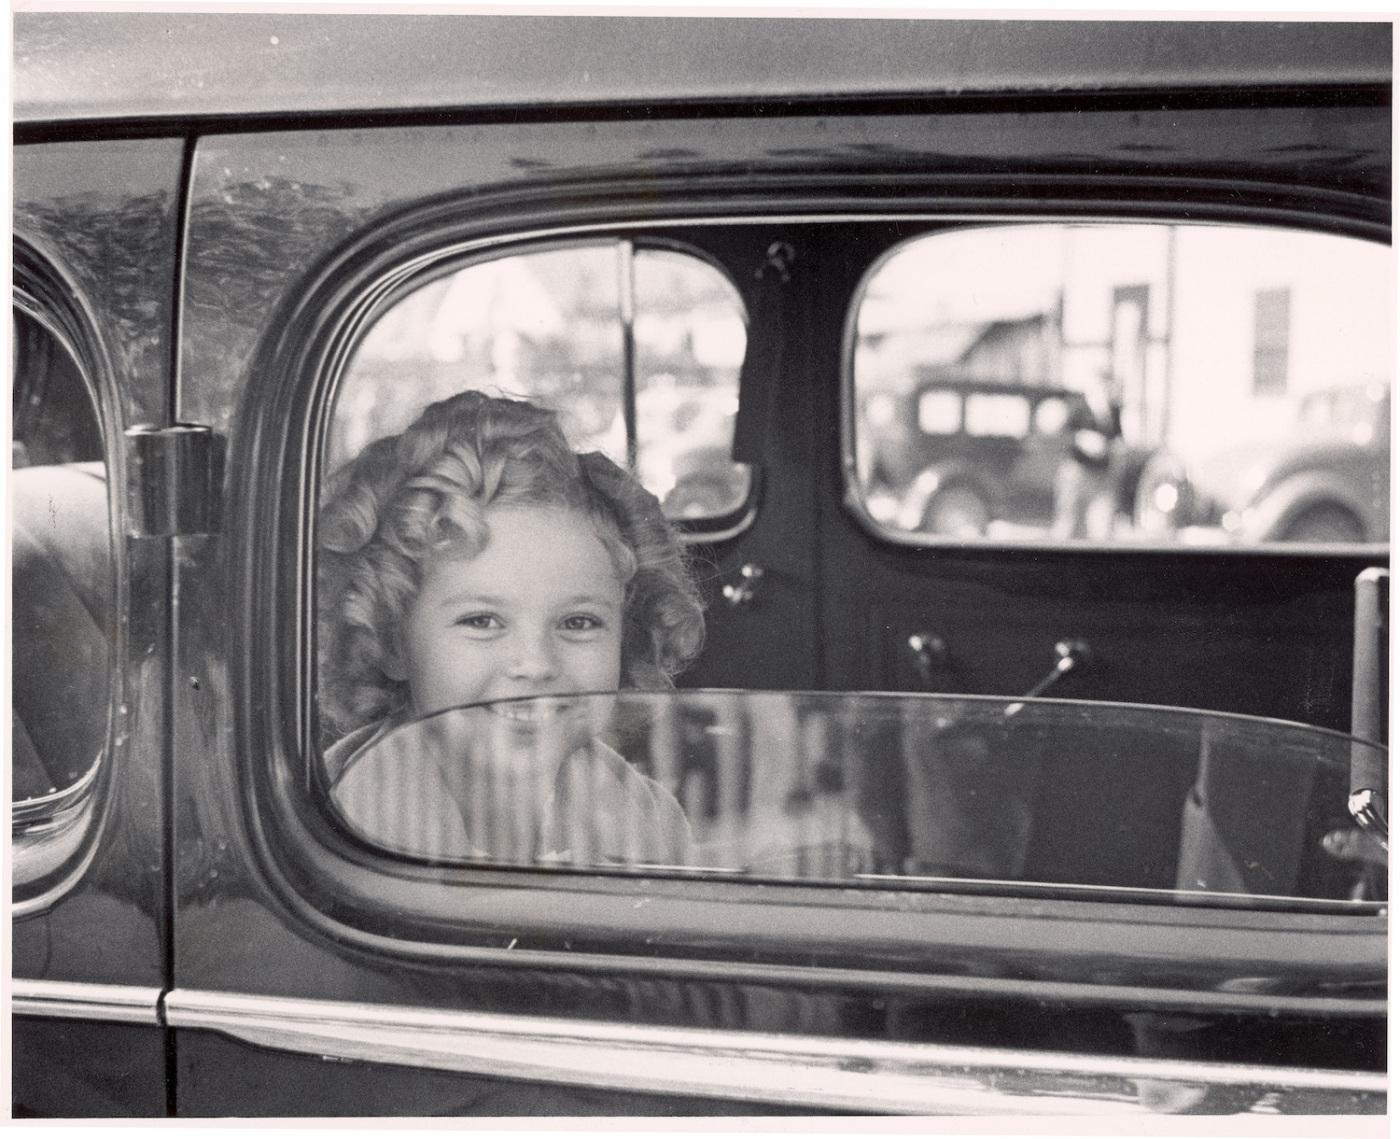 Shirley Temple arriving at 20th Century Fox film studio lot to celebrate her eighth birthday, in 1936.